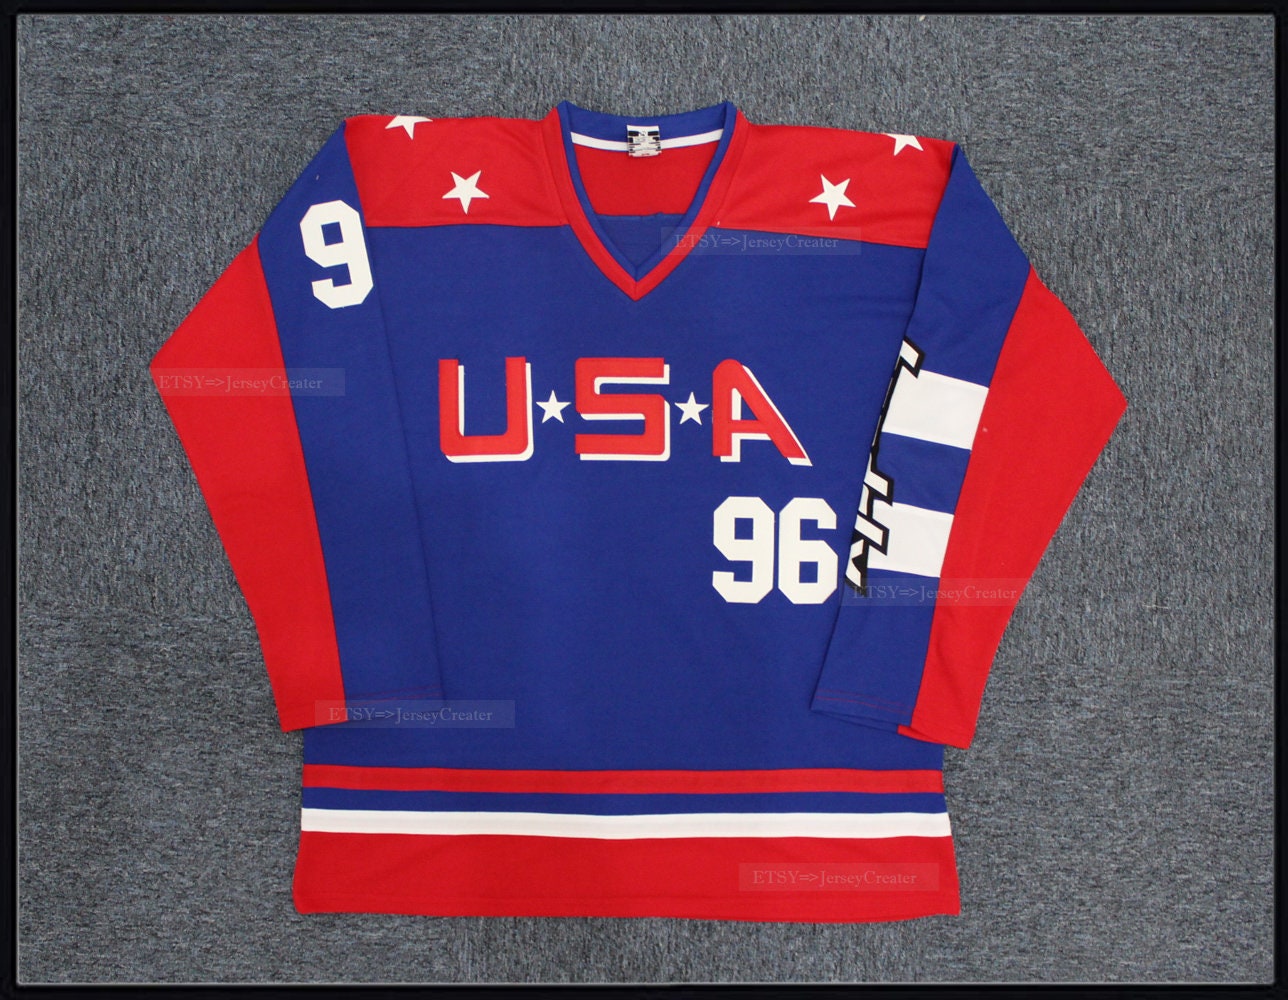 The Mighty Ducks Movie Jersey 96 Charlie Conway 99 Adam Banks 66 BOMBAY 44  Reed